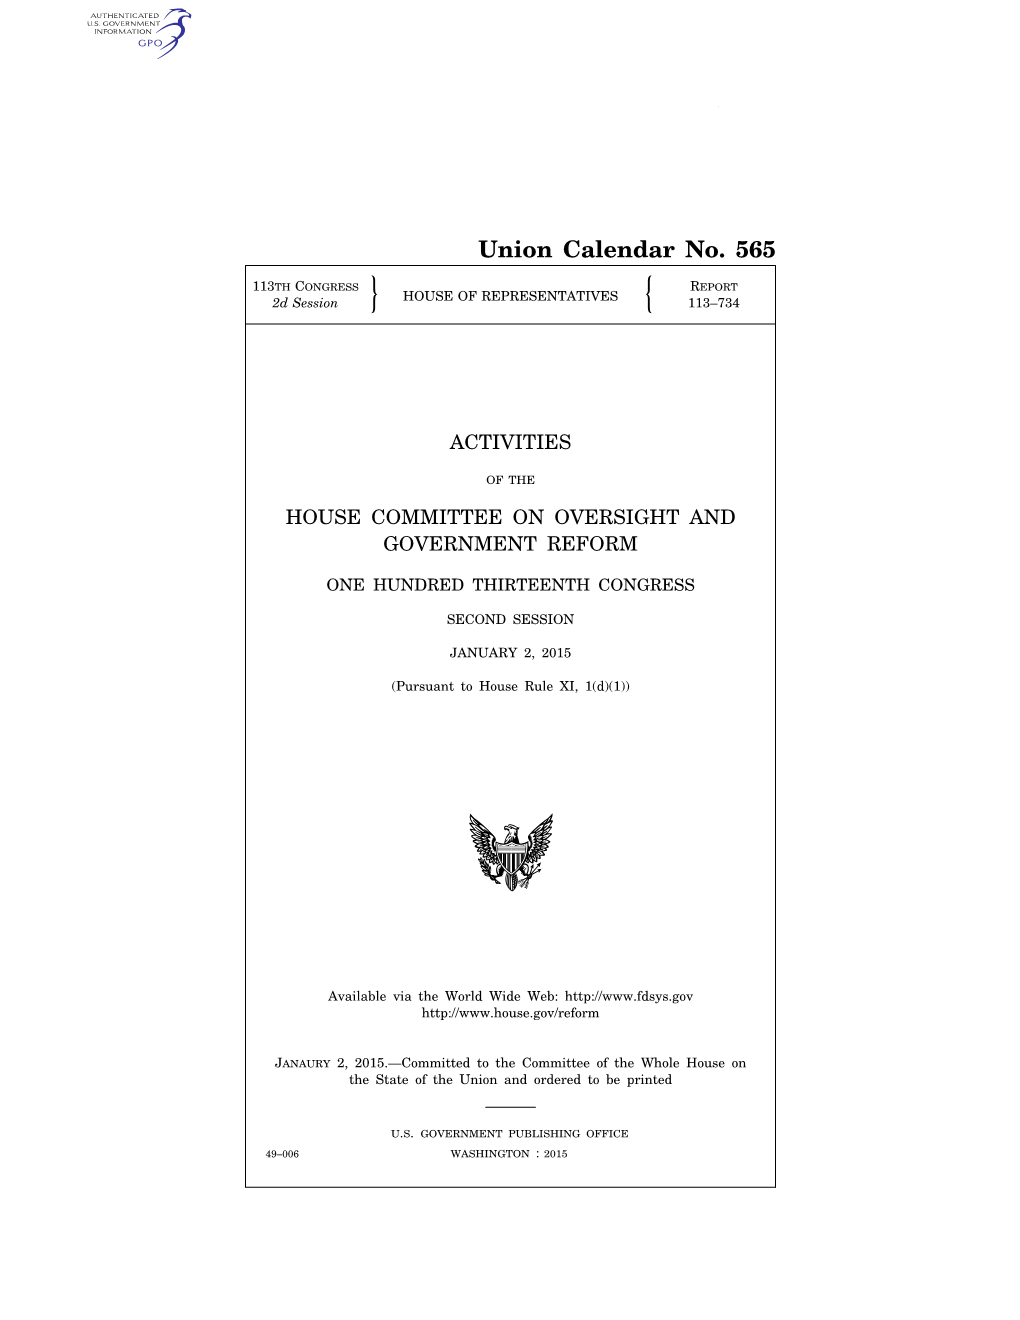 Committee on Oversight and Government Reform's